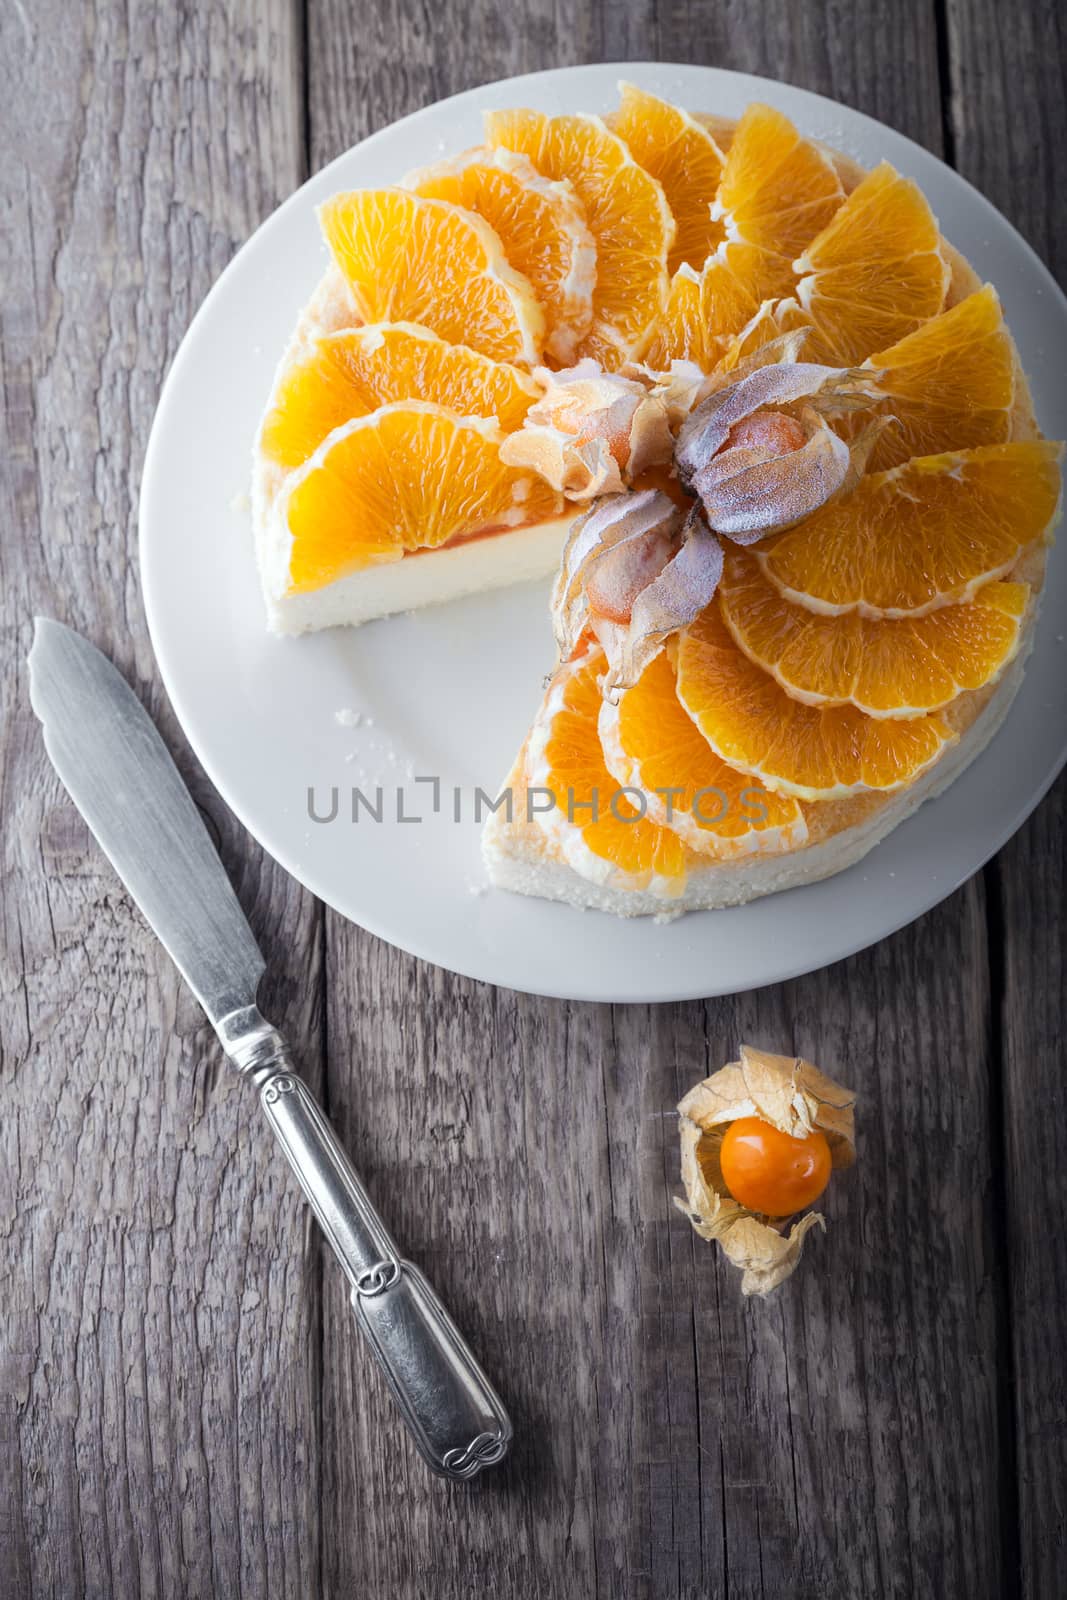 Cheesecake decorated with oranges and physalis by supercat67